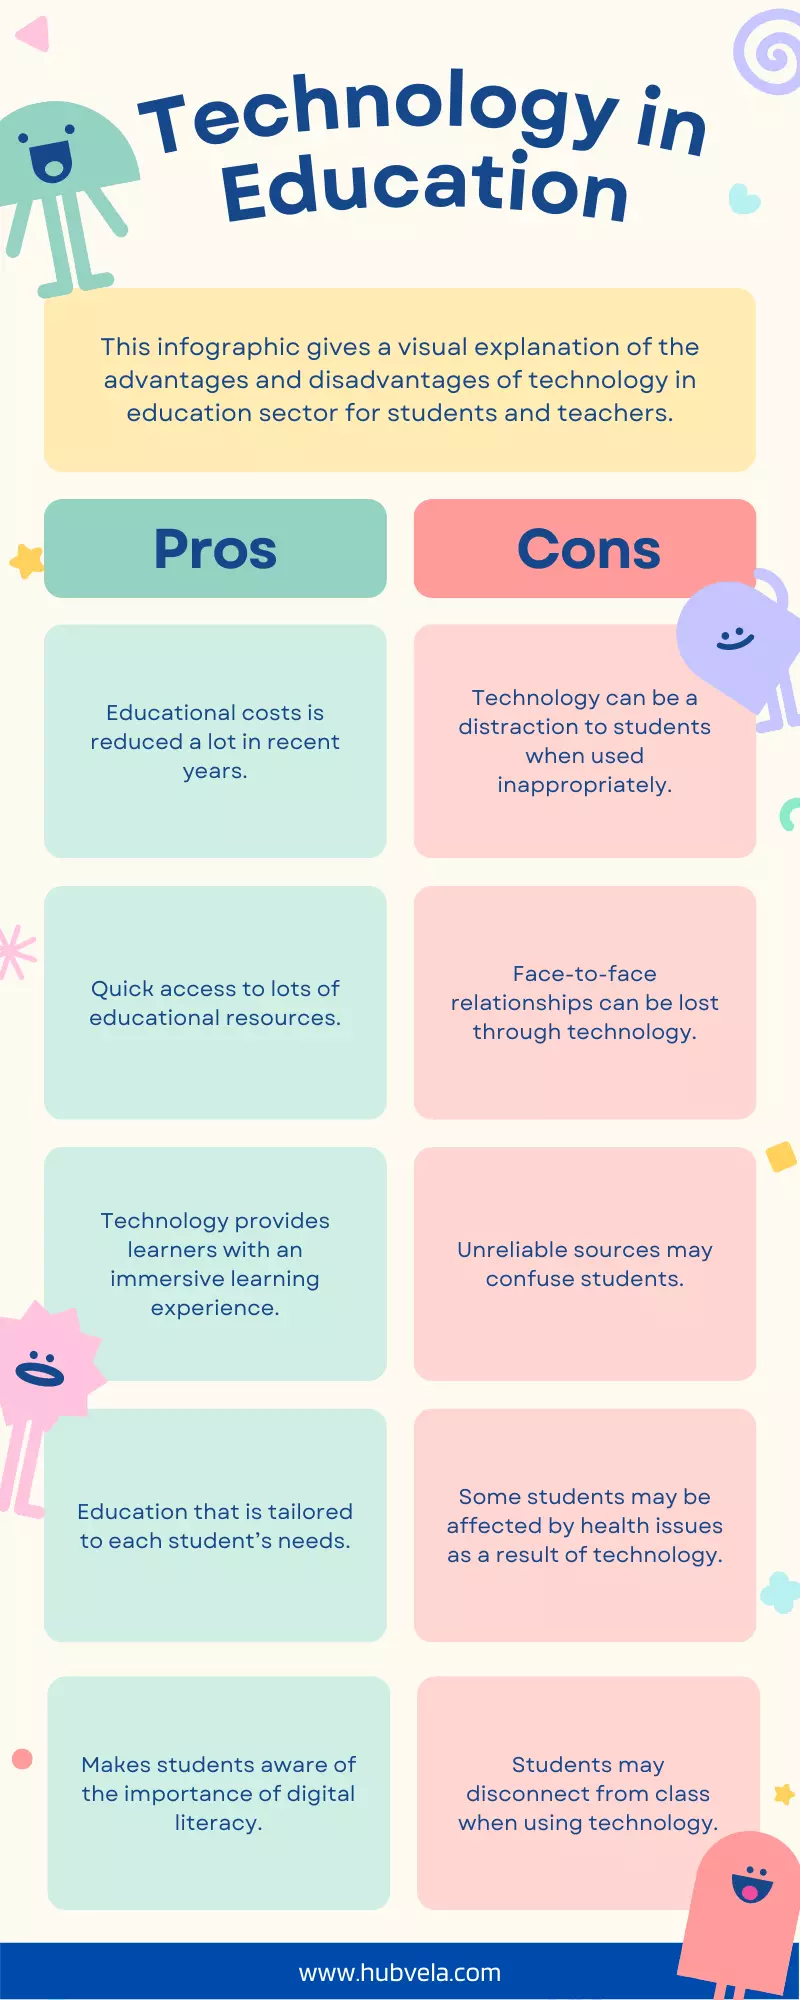 Technology advantages and disadvantages in education infographic